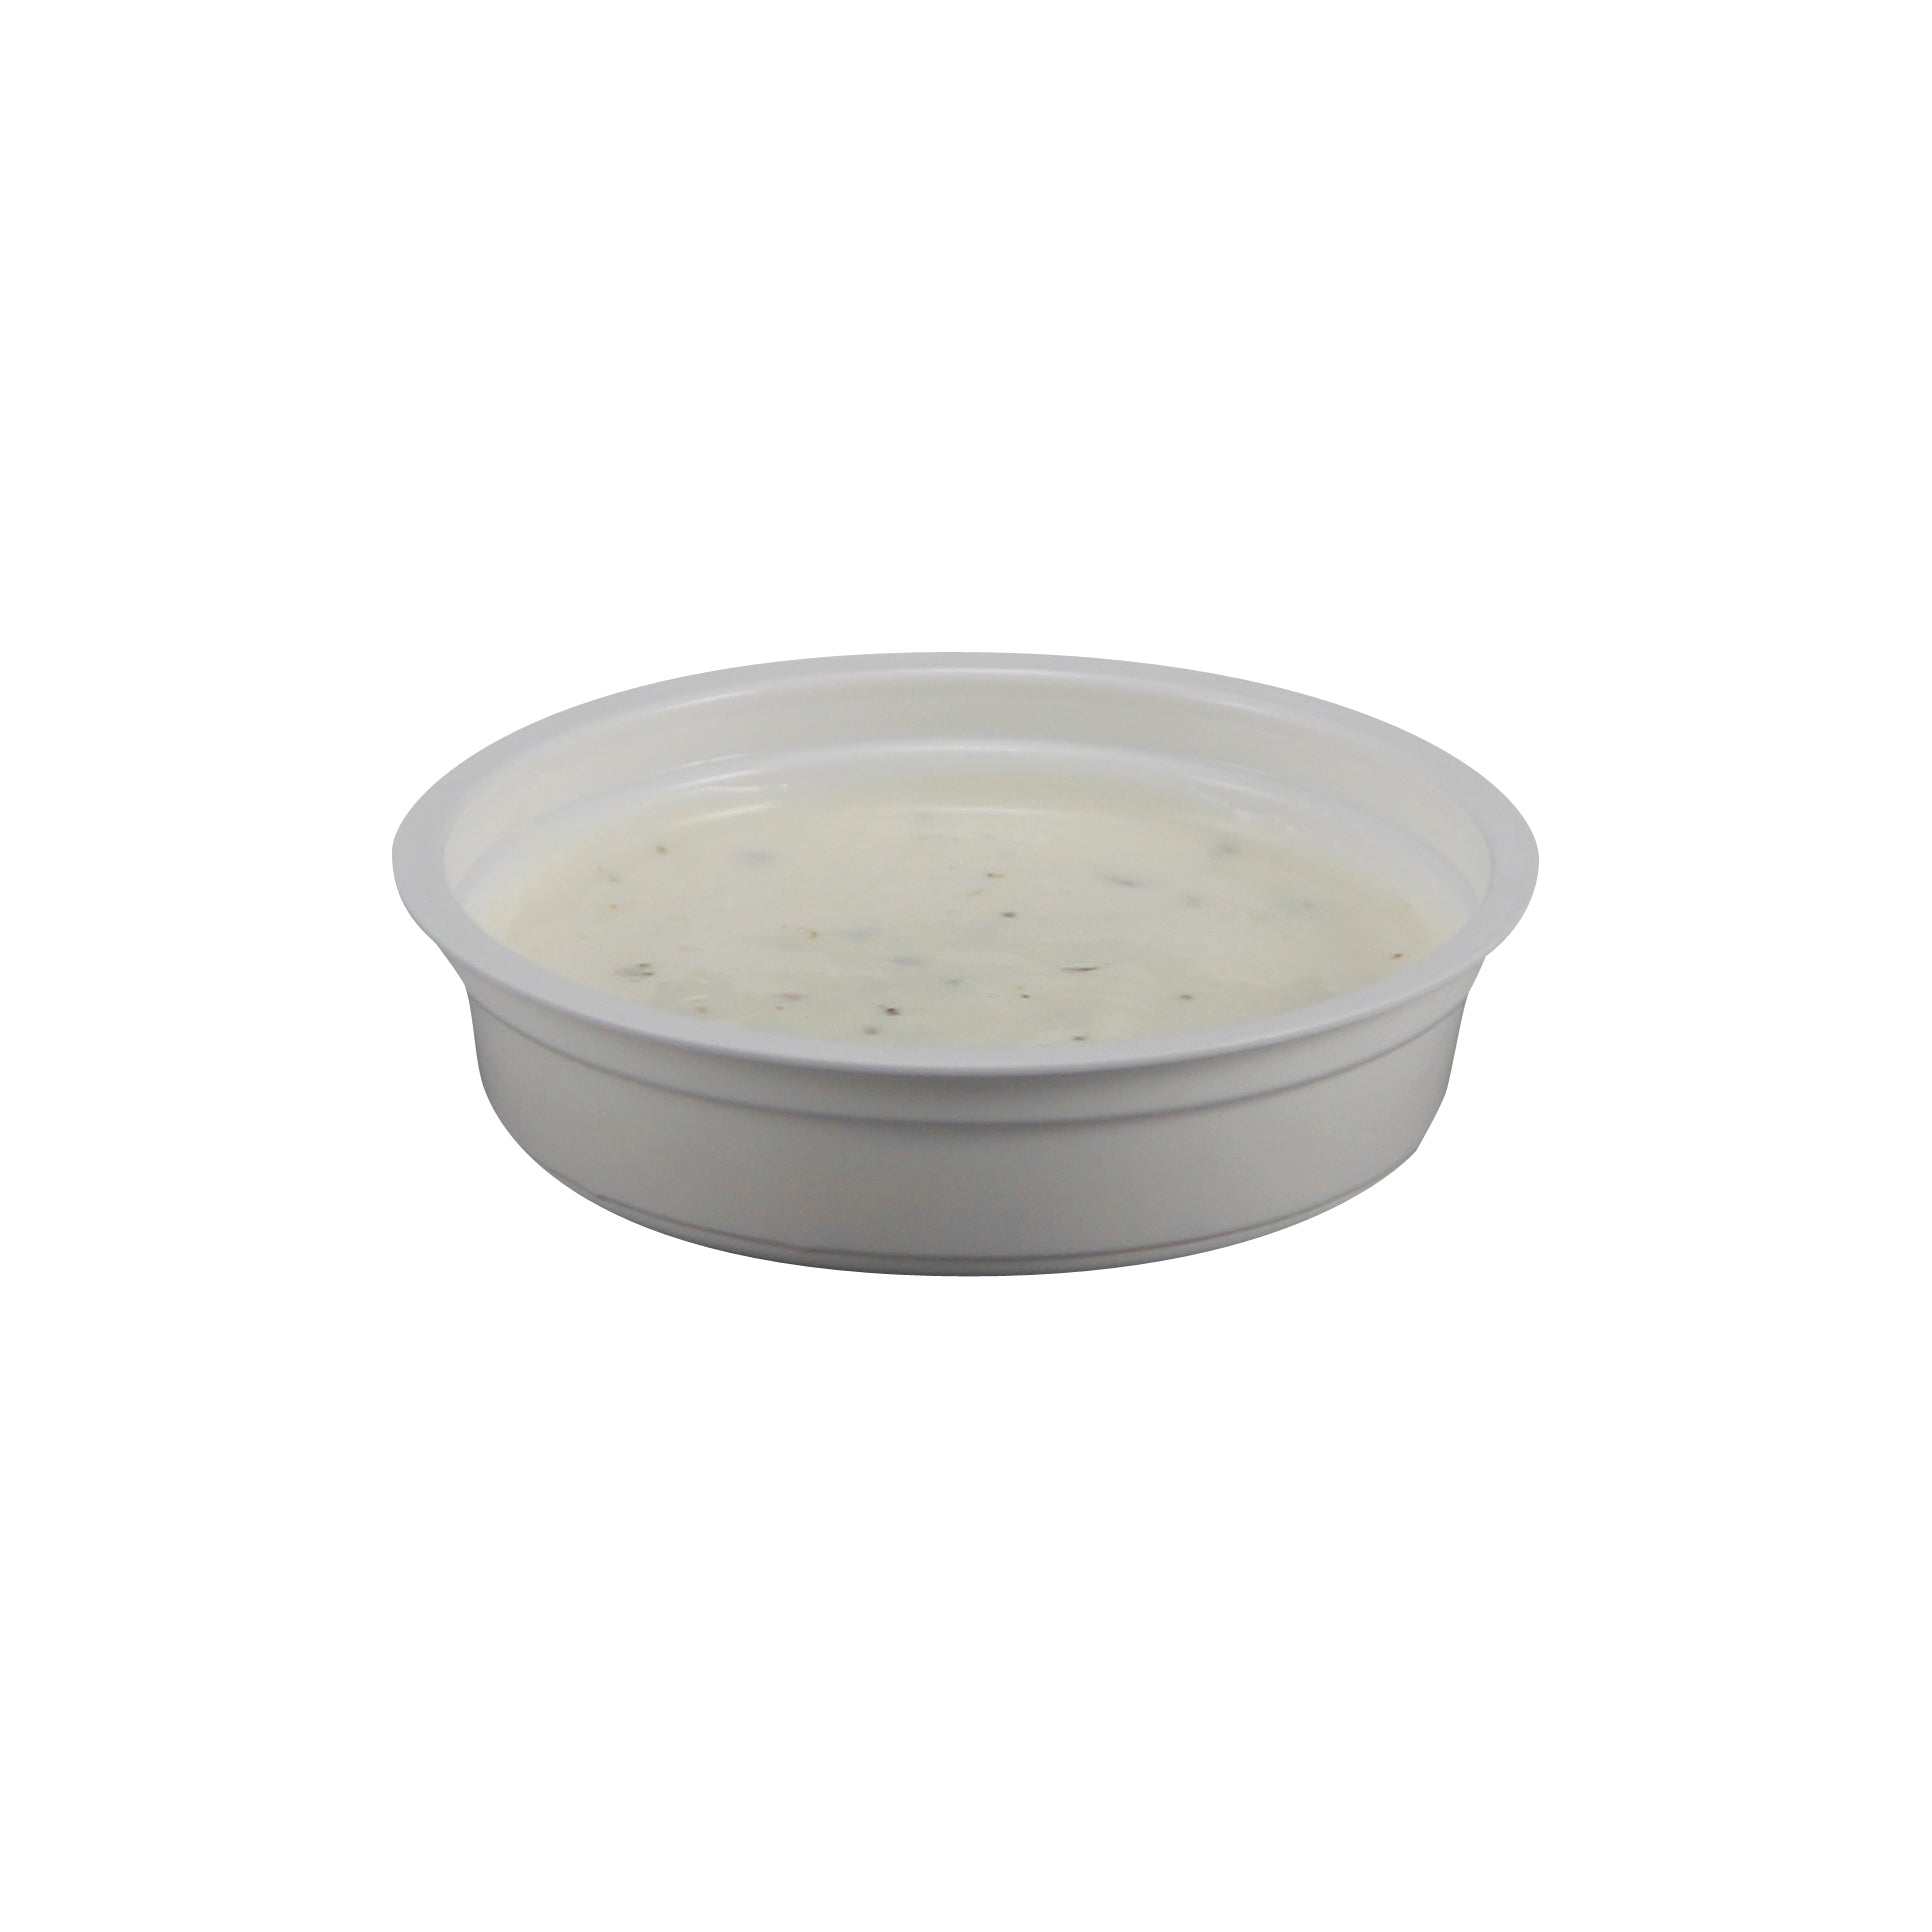 CAINS 1 GAL RANCH DRESSING-CASE OF 4